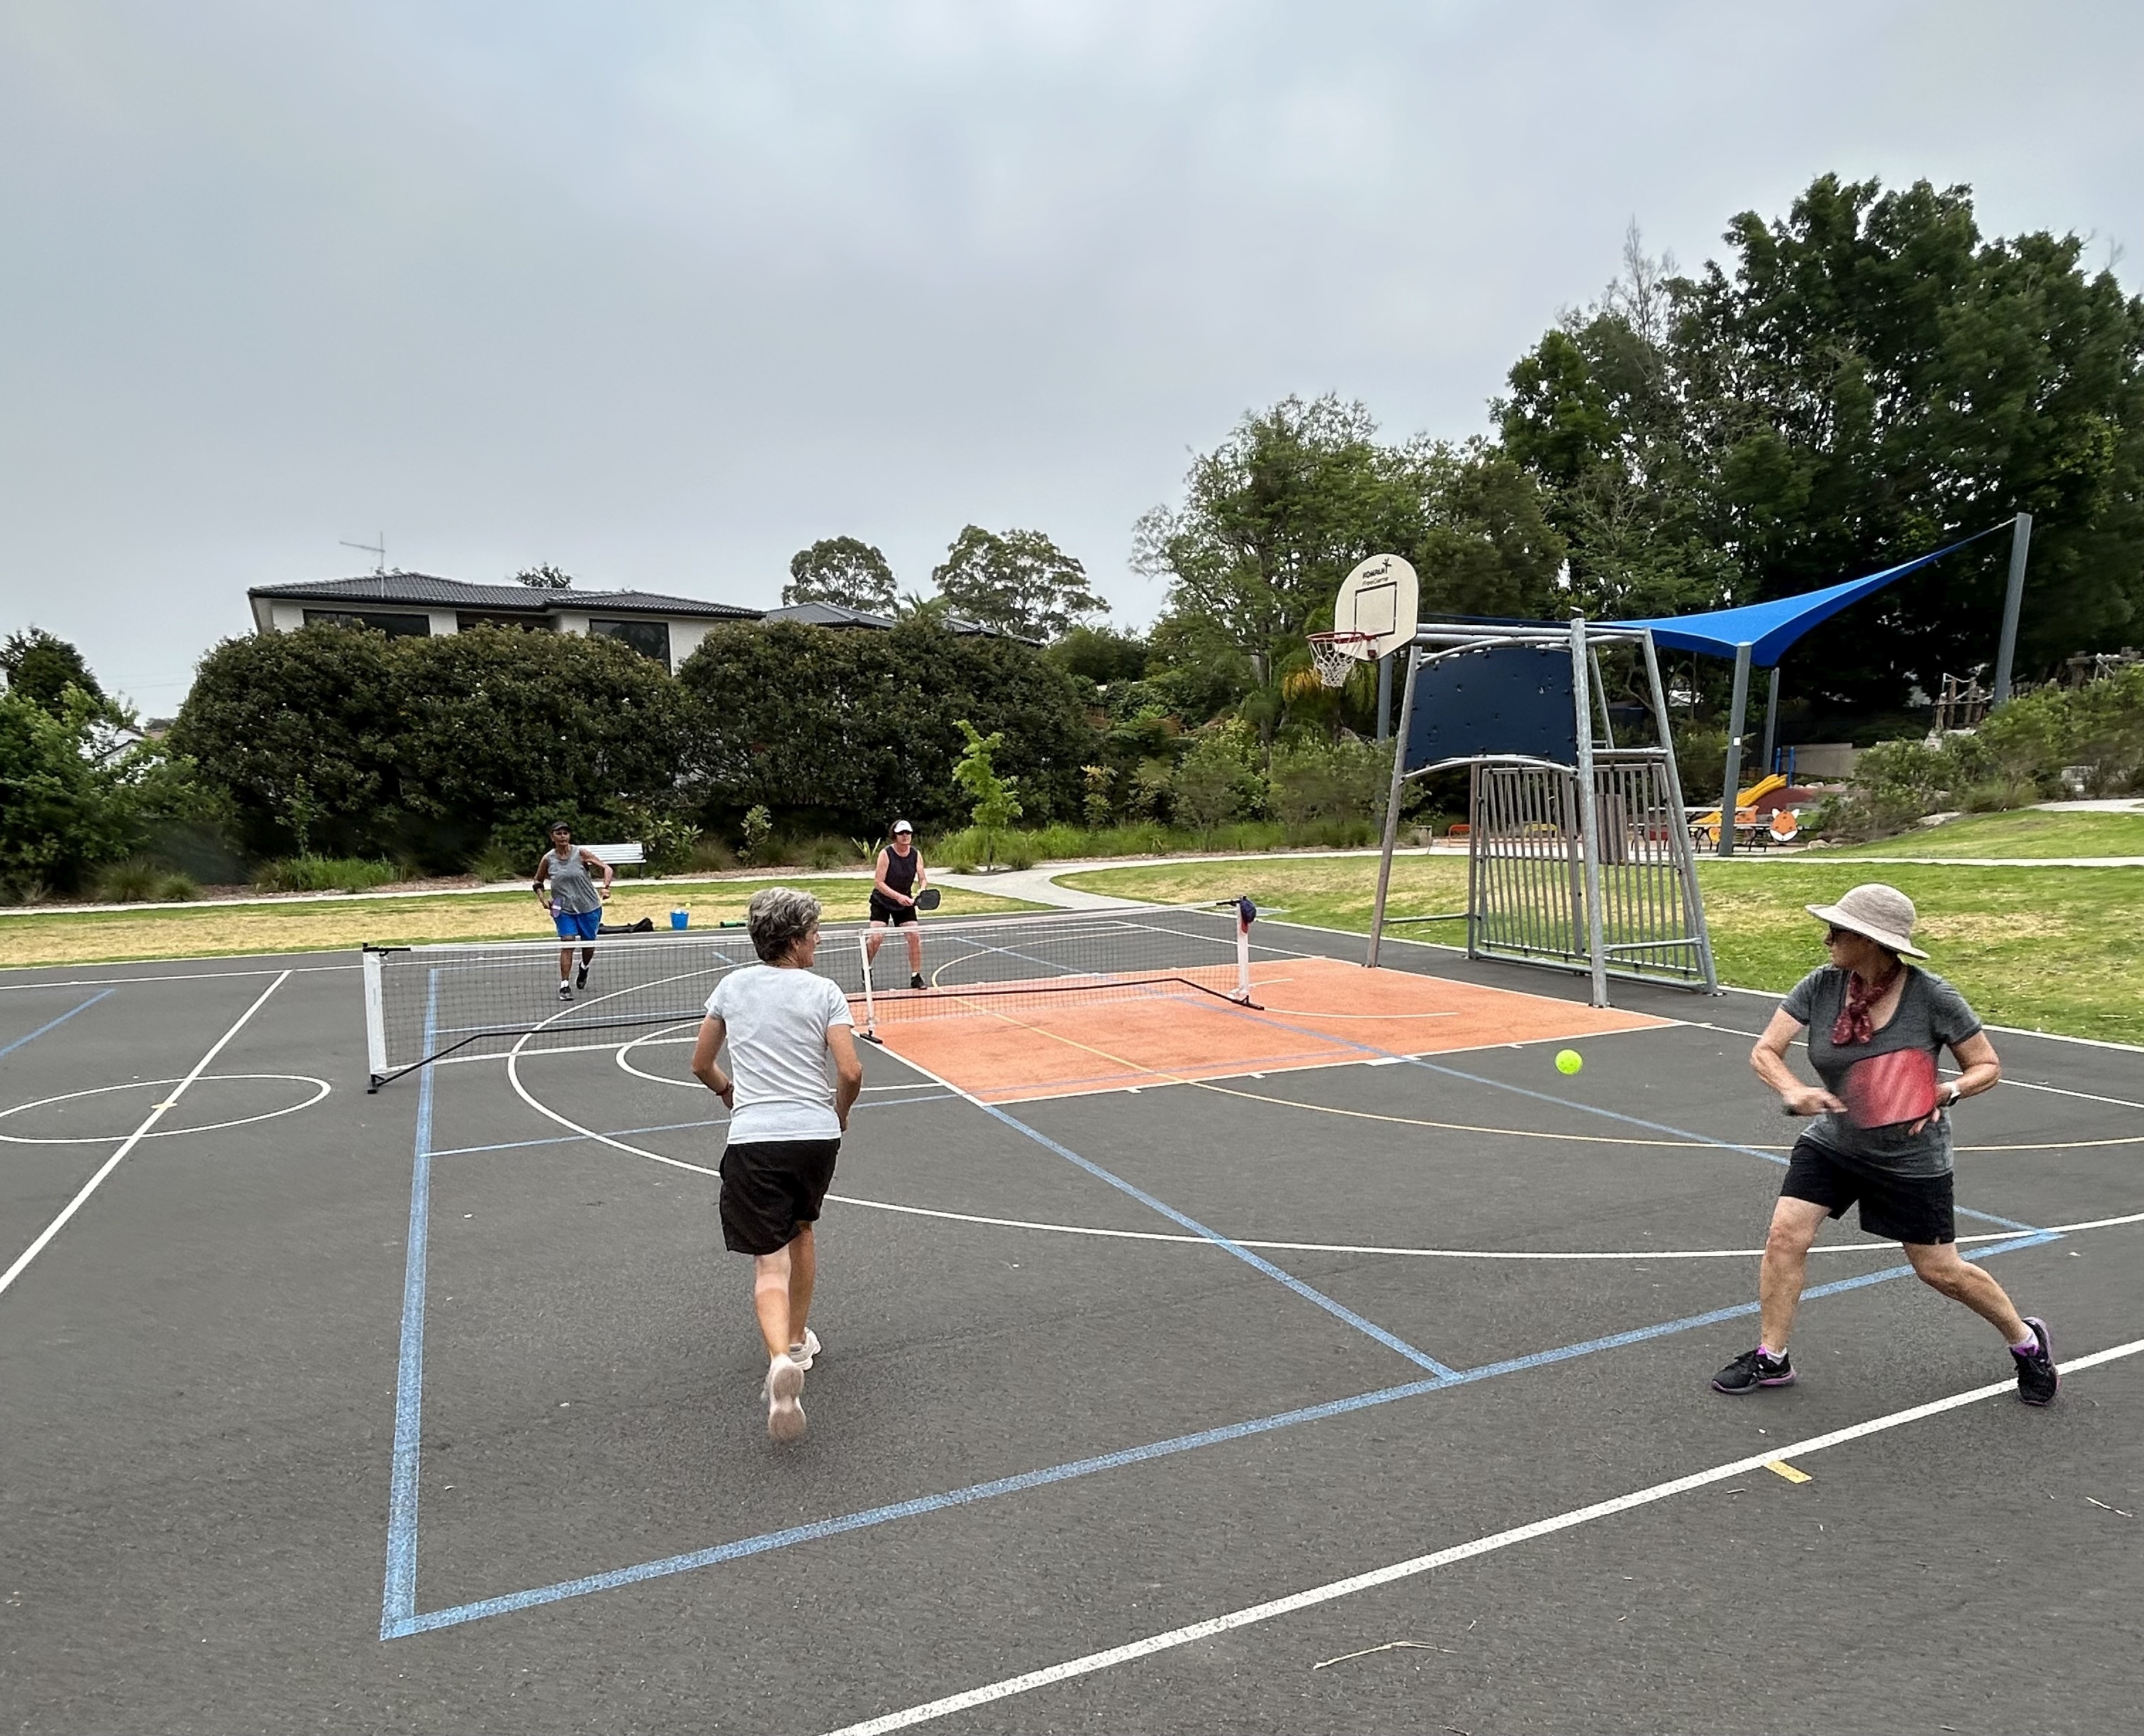 Pickleball location at the Kings Park basketball court